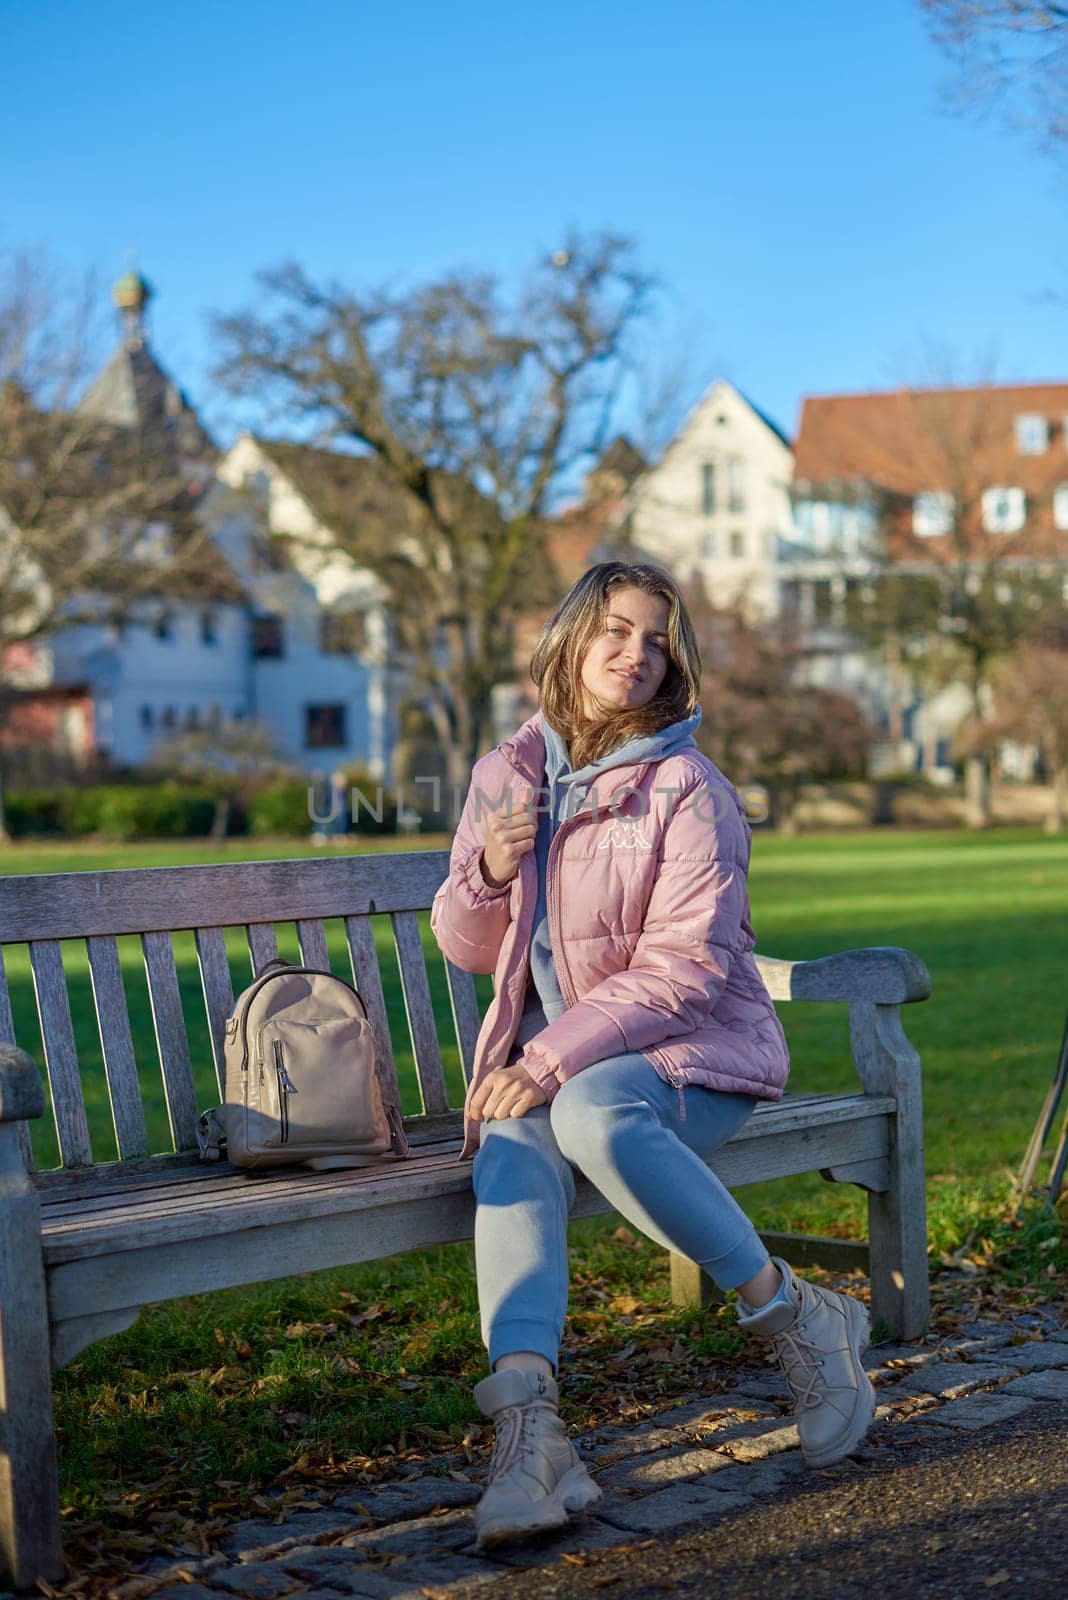 Winter Joy in Bitigheim-Bissingen: Beautiful Girl in Pink Jacket Sitting Amidst Half-Timbered Charm. beautiful girl in a pink winter jacket sitting on a bench in a park, set against the backdrop of the historic town of Bitigheim-Bissingen, Baden-Württemberg, Germany. by Andrii_Ko